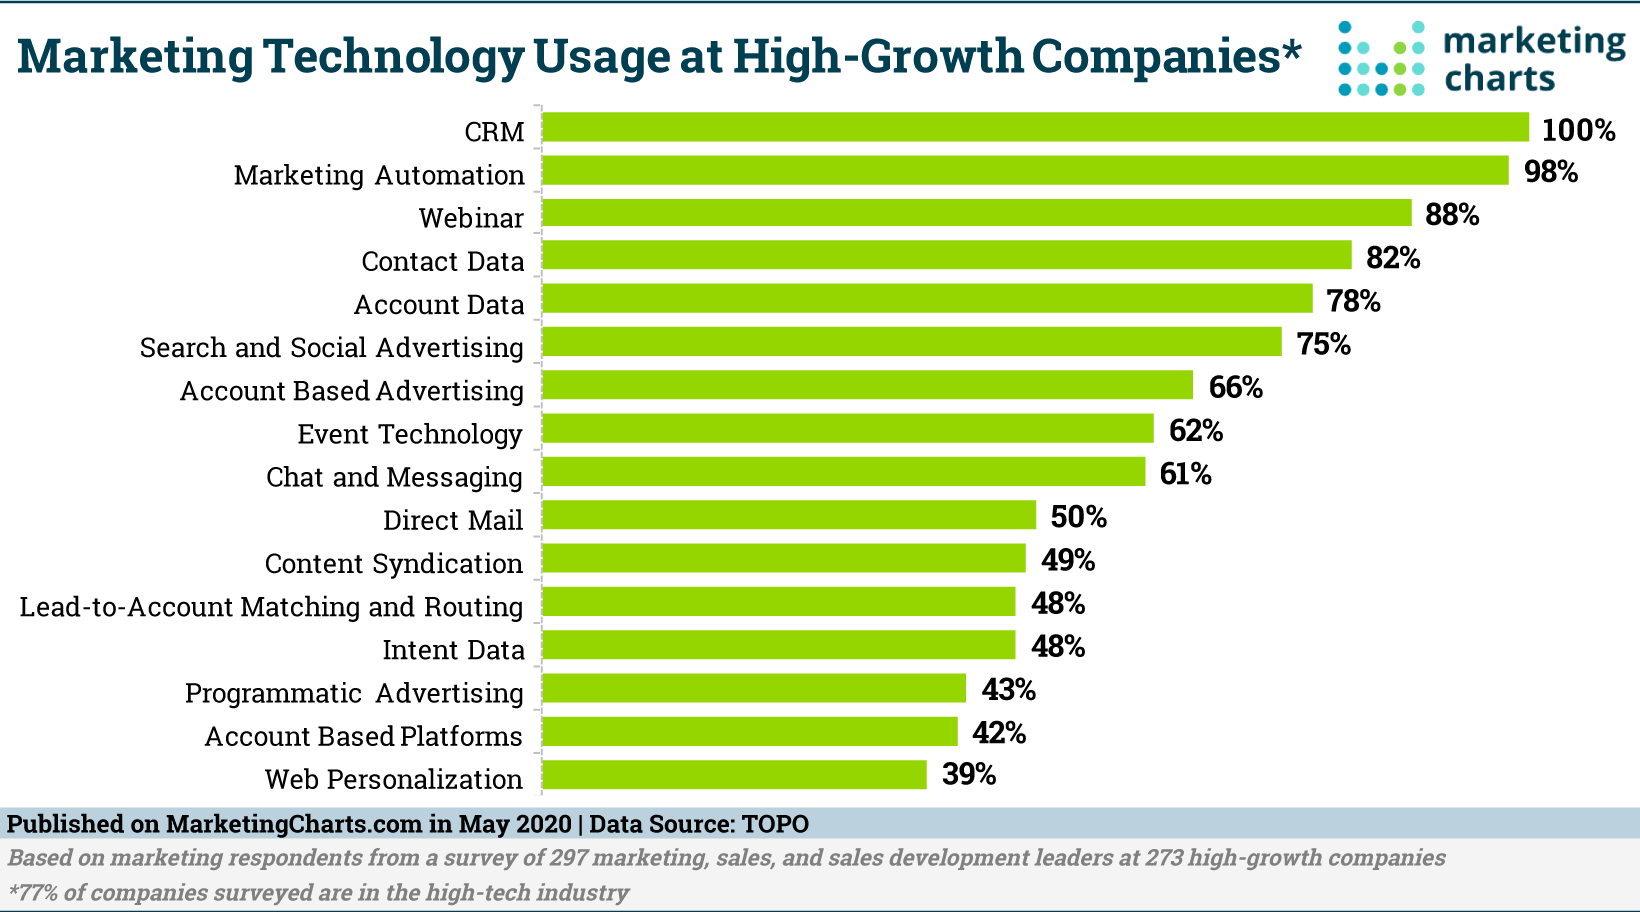 Marketing Technology on the Rise What HighGrowth Companies Are